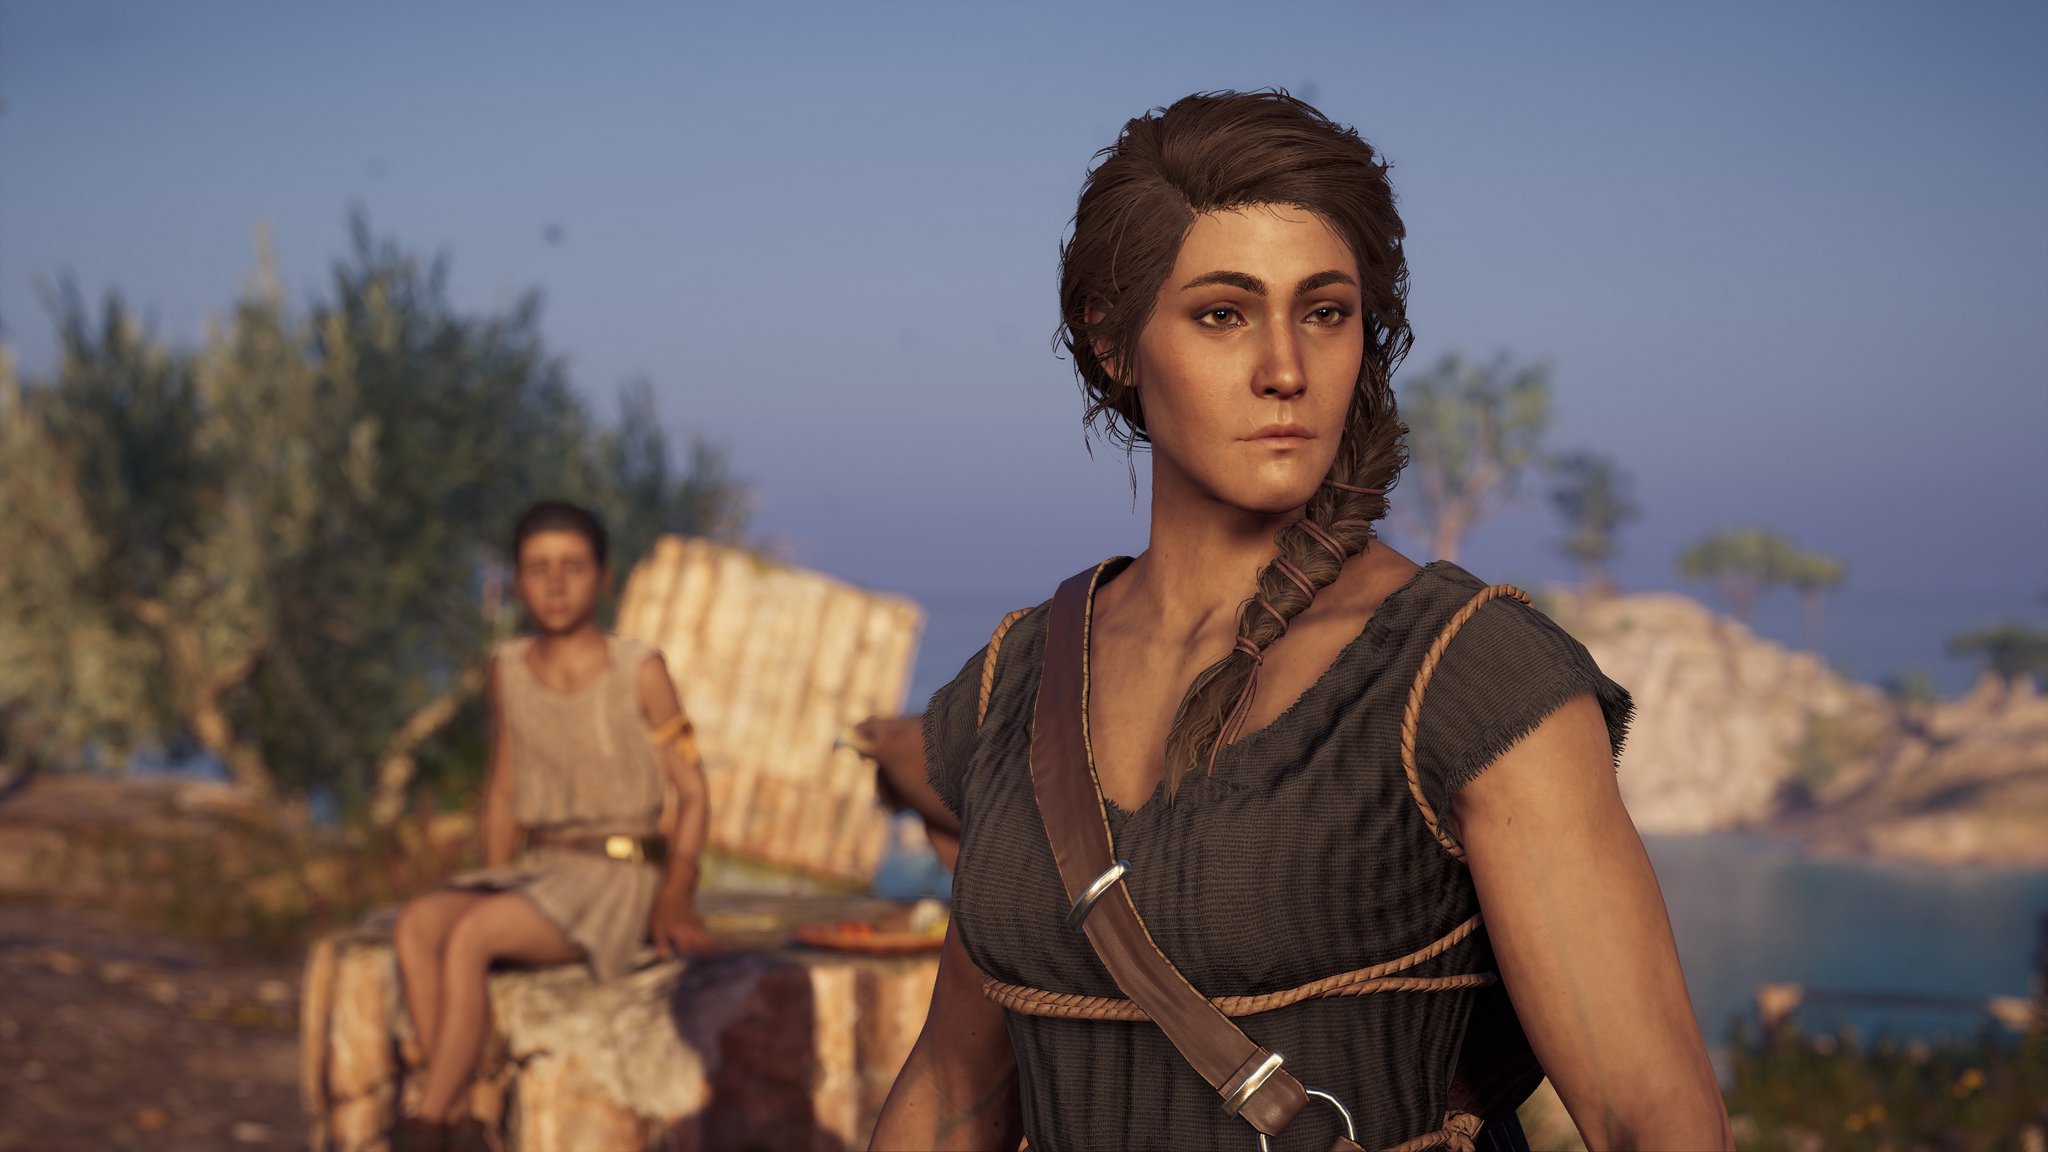 Phoebe assassin's creed odyssey